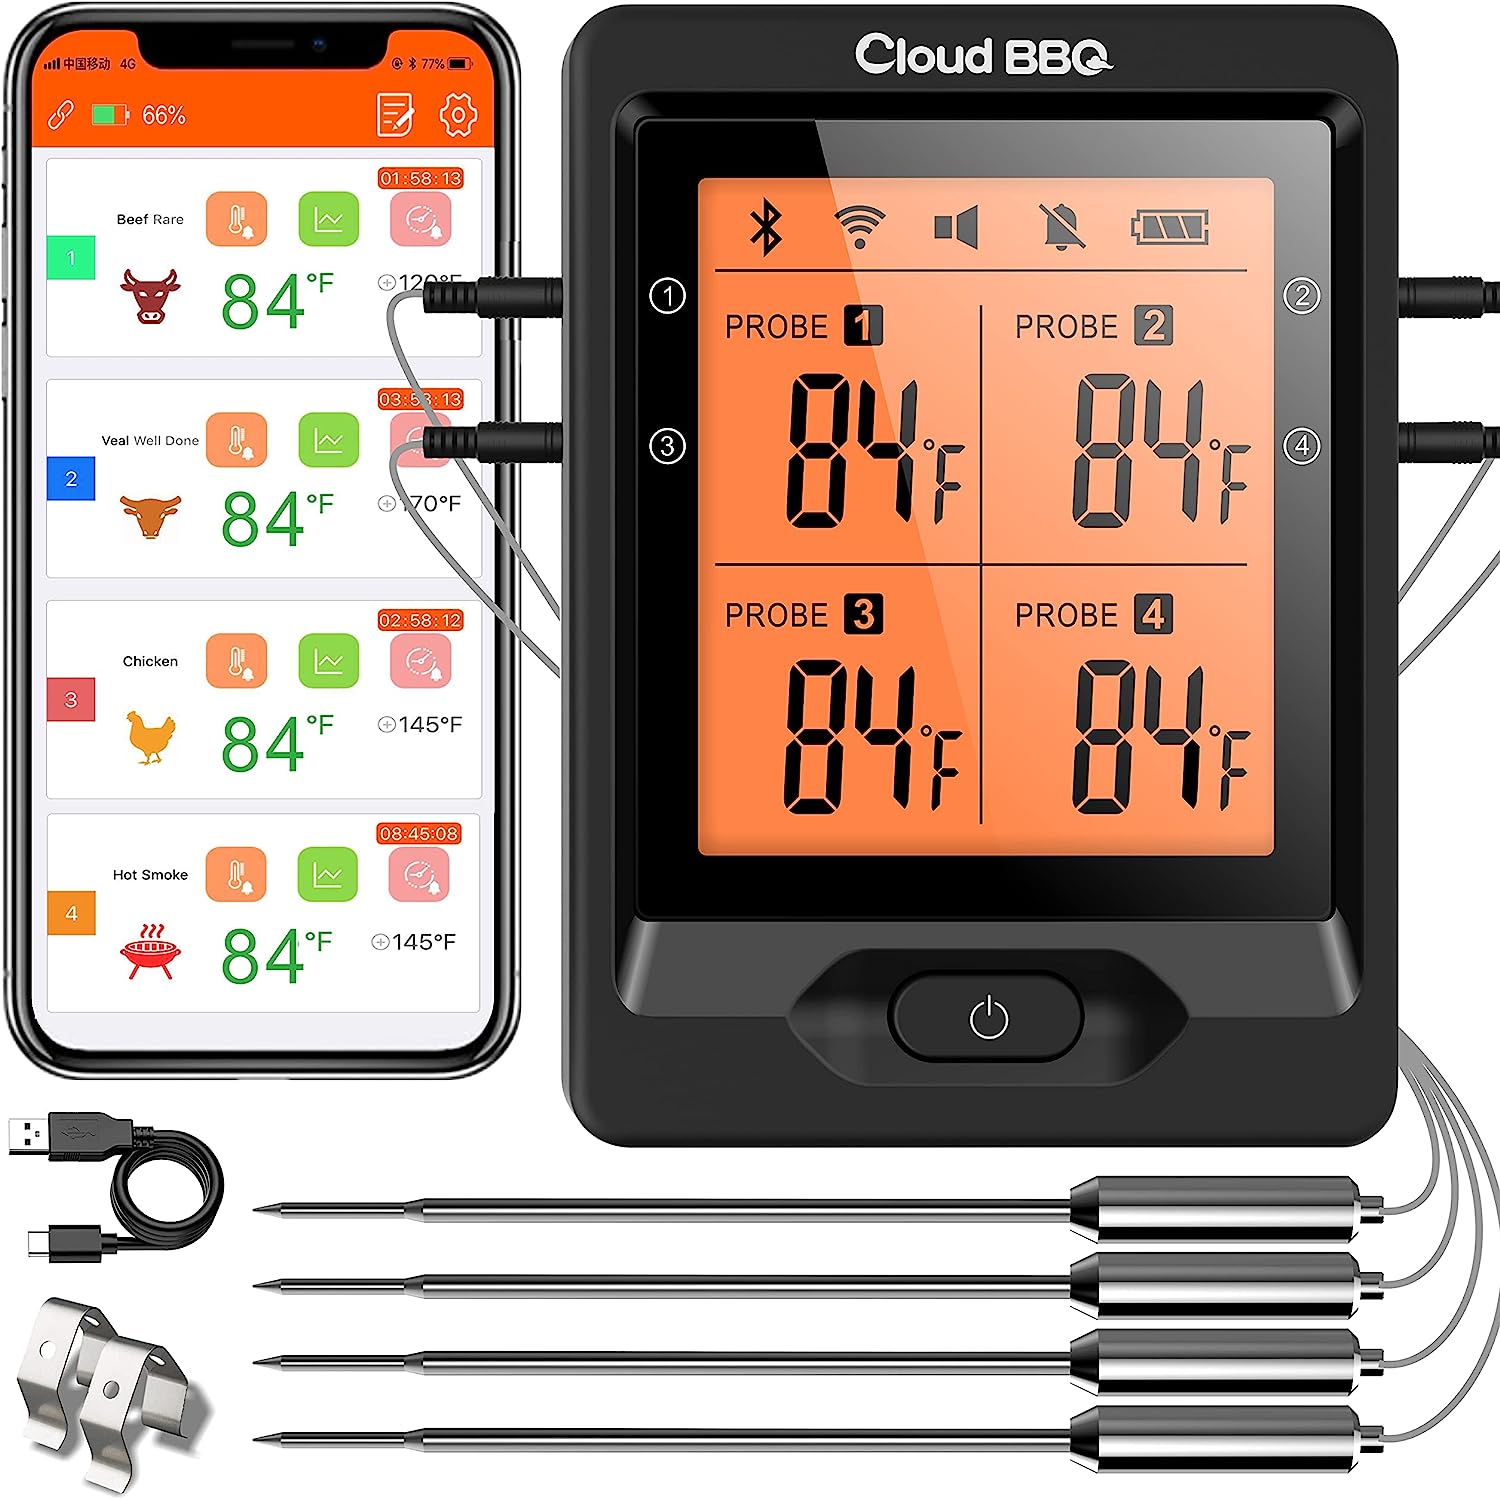 Cloud BBQ Wireless Meat Thermometer of 500FT, [...]